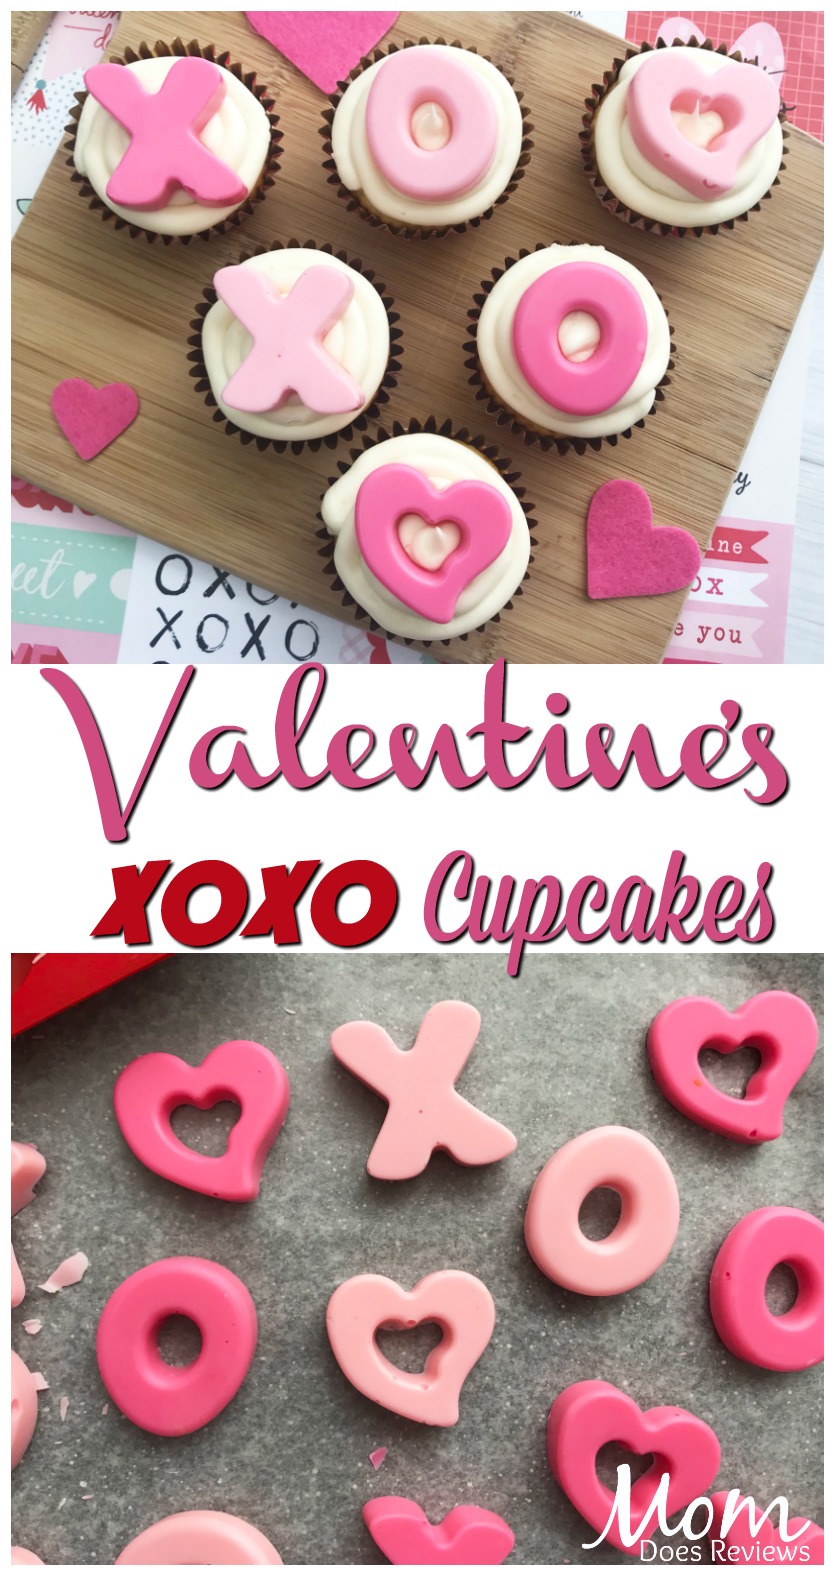 Valentine Hugs and Kisses Cupcakes #sweets #recipes #valentinesday #hugs #love 